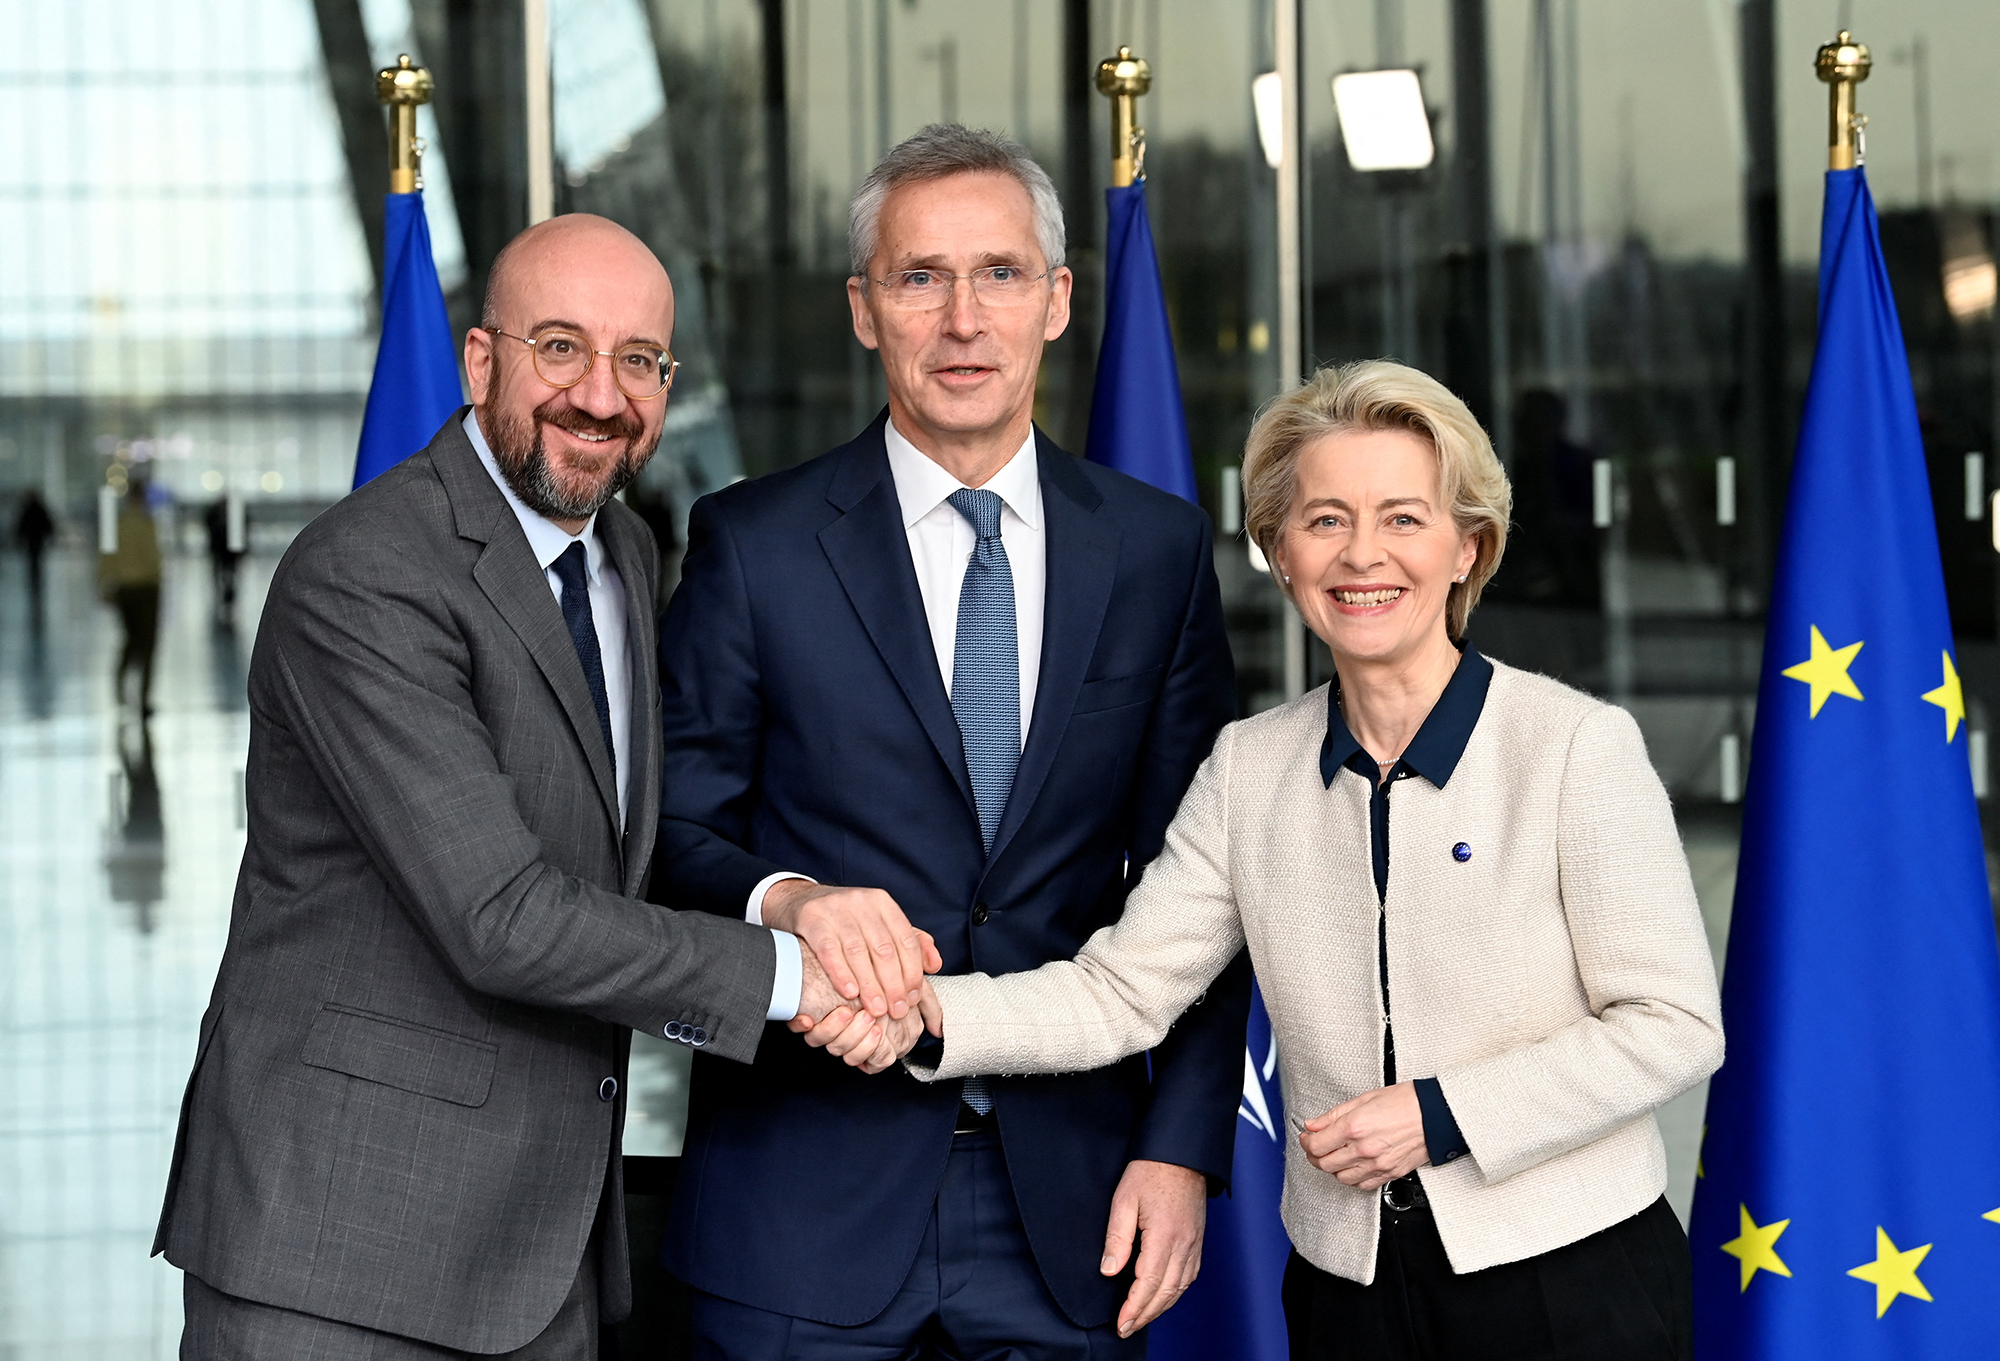 NATO's Secretary General Jens Stoltenberg, President of the European Council Charles Michel and President of the European Commission Ursula von der Leyen pose following the signing of a joint declaration of cooperation between the EU and NATO in Brussels, Belgium, on January 10.